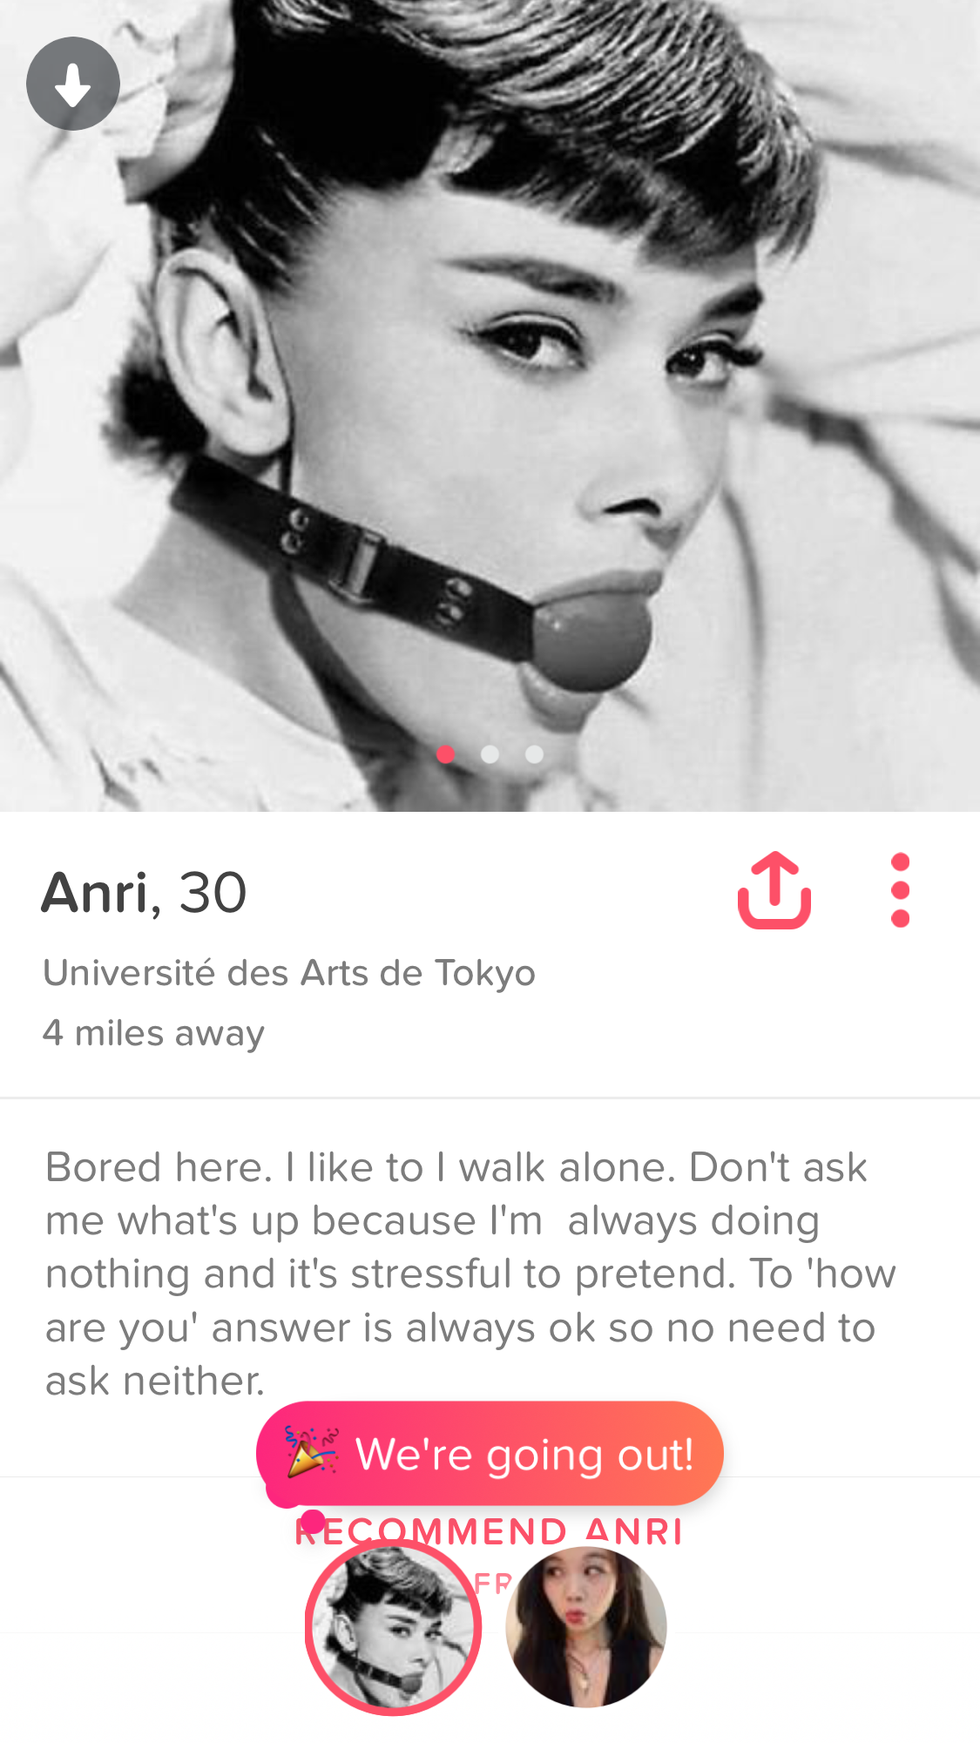 tinder - audrey hepburn sexy - Anri, 30 Universit des Arts de Tokyo 4 miles away Bored here. I to I walk alone. Don't ask me what's up because I'm always doing nothing and it's stressful to pretend. To 'how are you' answer is always ok so no need to ask n